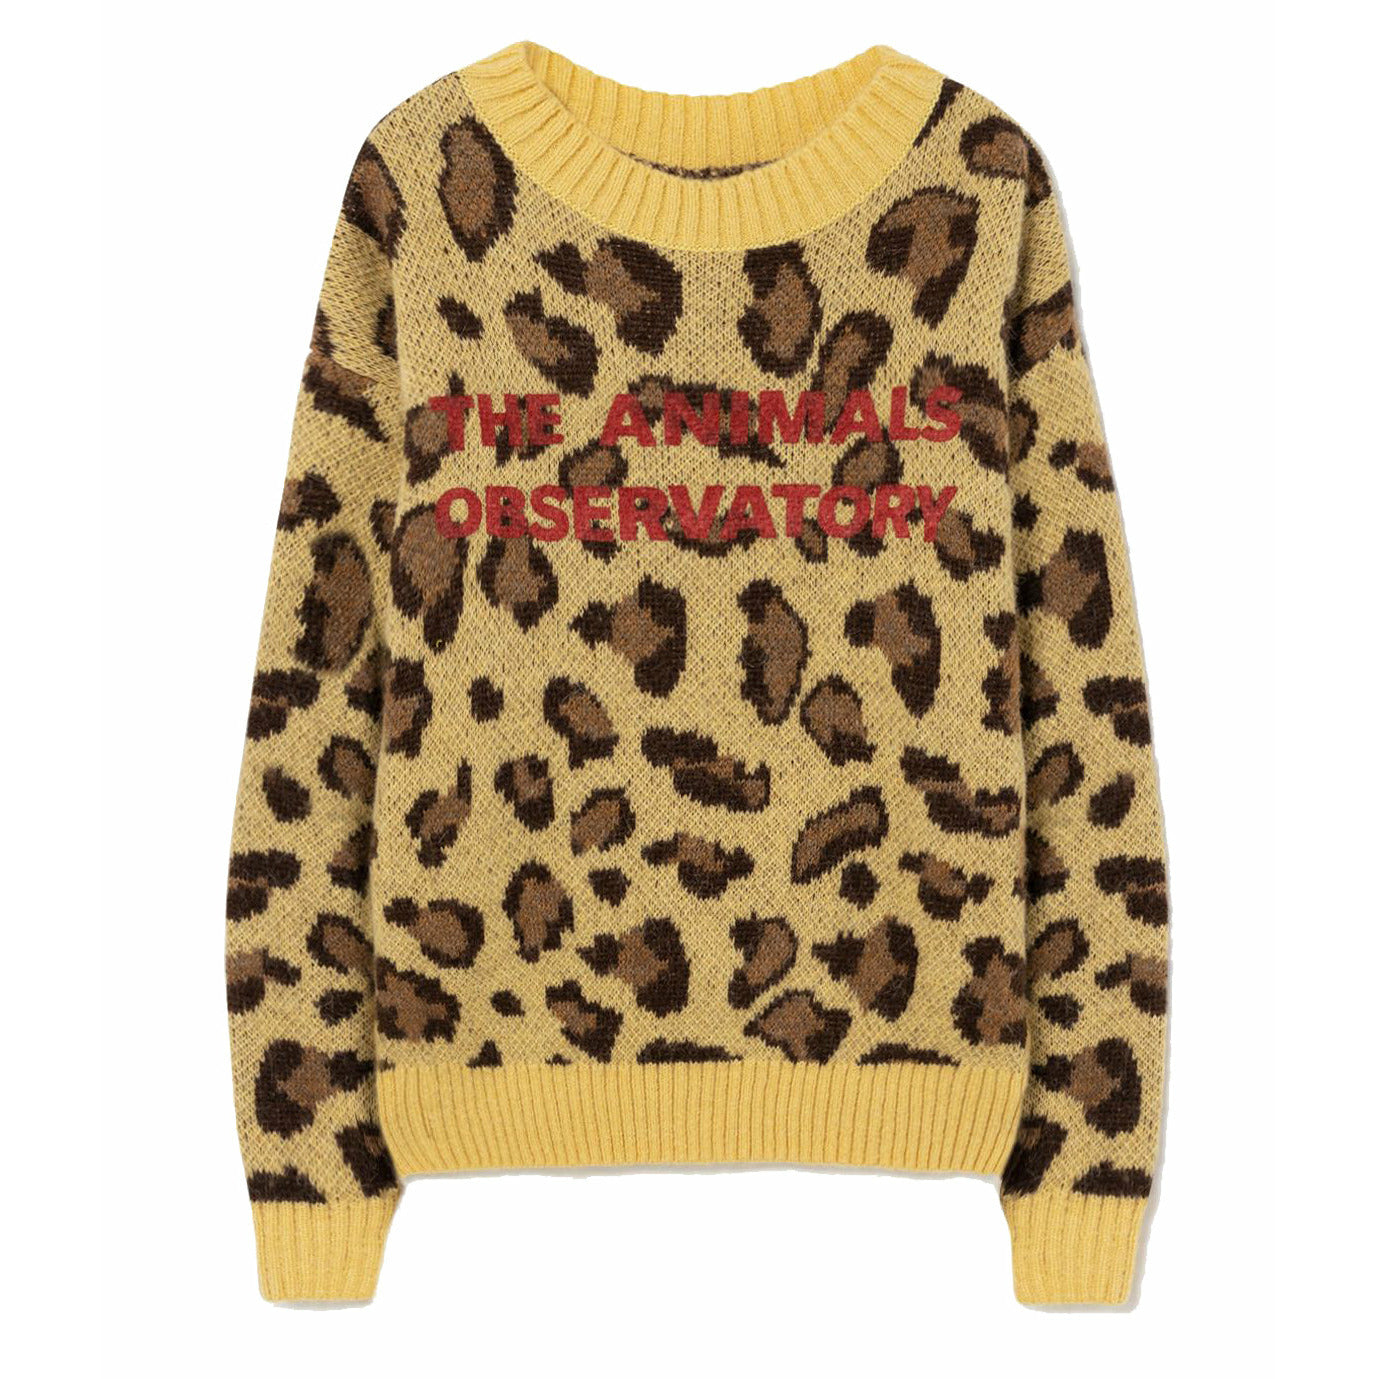 Arty Bull Kids Sweater - Yellow The Animals Observatory